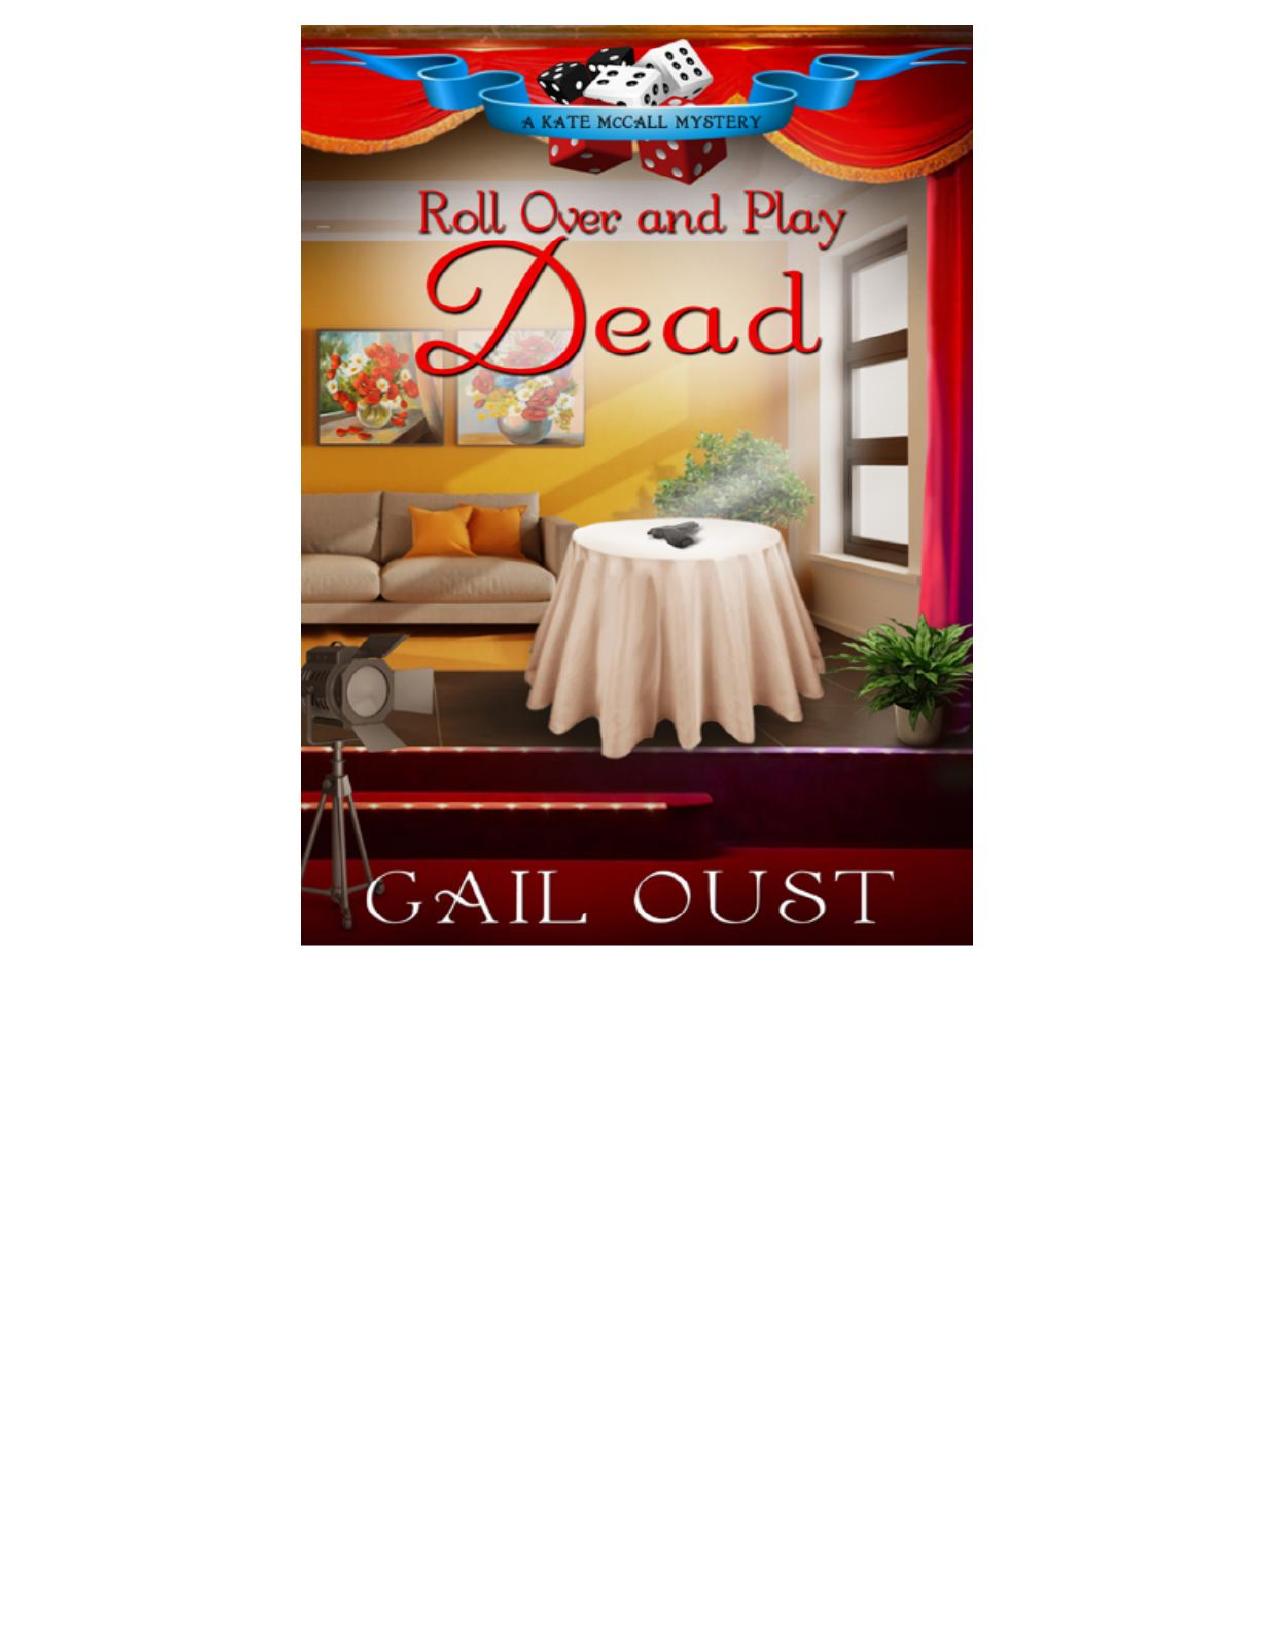 Roll Over and Play Dead by Gail Oust